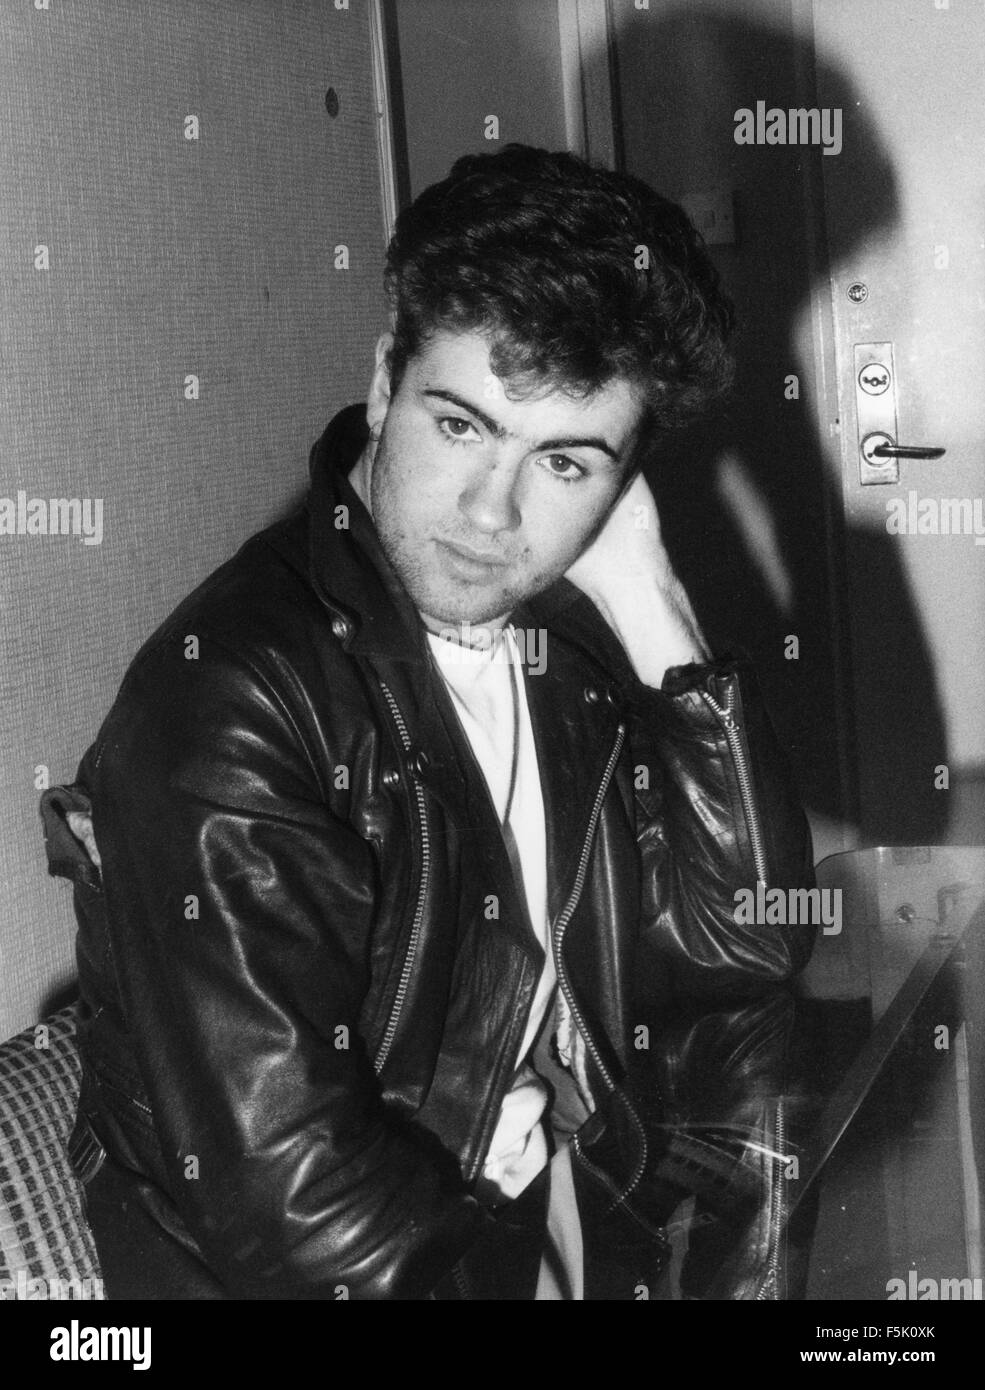 GEORGE MICHAEL UK pop musician in late 1982 at the offices of Wham's first record company Innervision. Photo: Rudi Keuntje Stock Photo